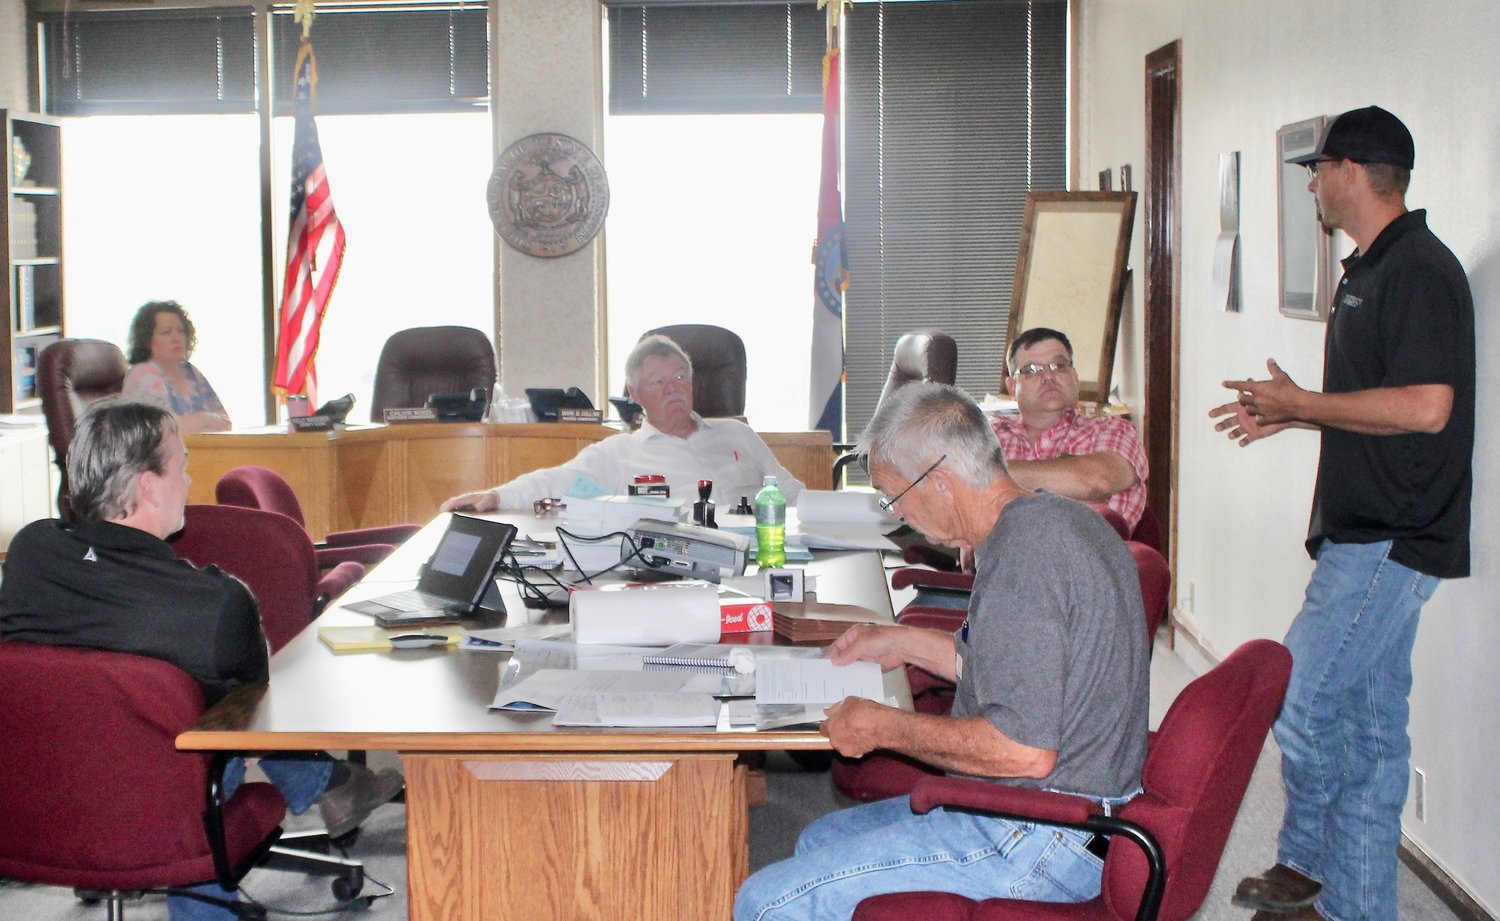 Jeremy Manning, structural engineer for Smith & Co. Engineering, standing at right, gives a presentation to the Howell County Commission of the results of his assessment of 20 local bridges being considered for repair. Listening, from left, are County Clerk Kelly Waggoner, Smith Co. engineer Bill Robison, Presiding Commissioner Mark Collins, Southern Commissioner Billy Sexton and Northern Commissioner Calvin Wood.